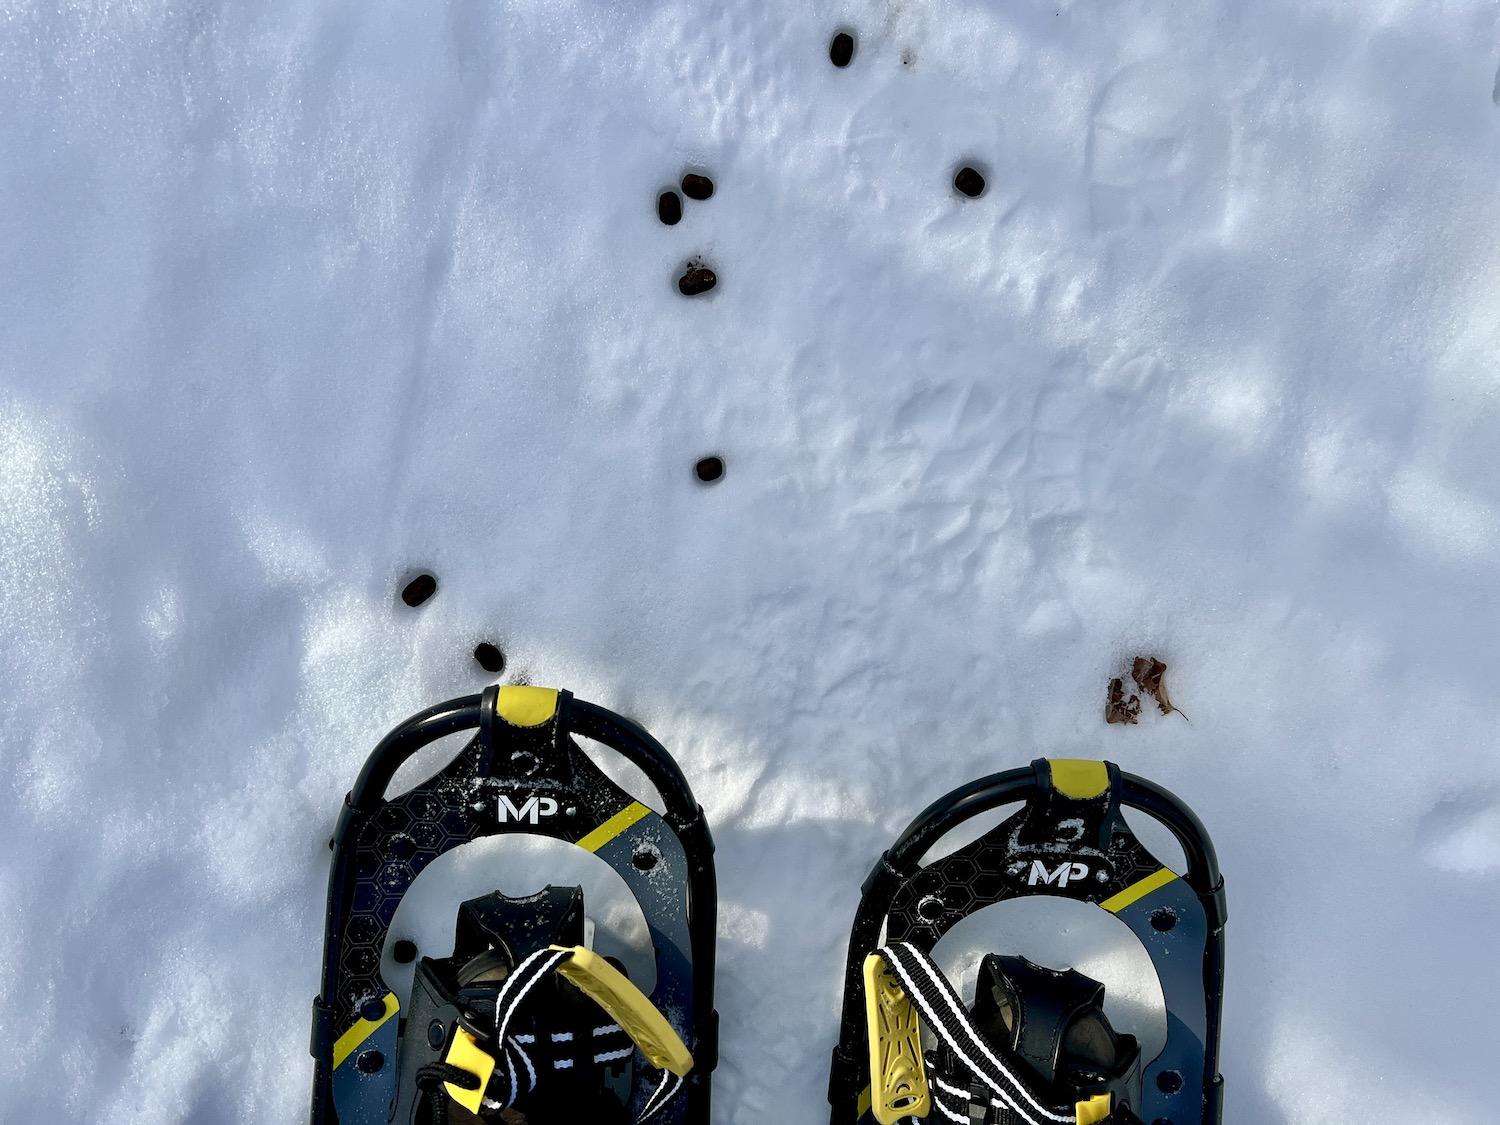 Signs of deer can be found while snowshoeing the Moss Lake Trail.